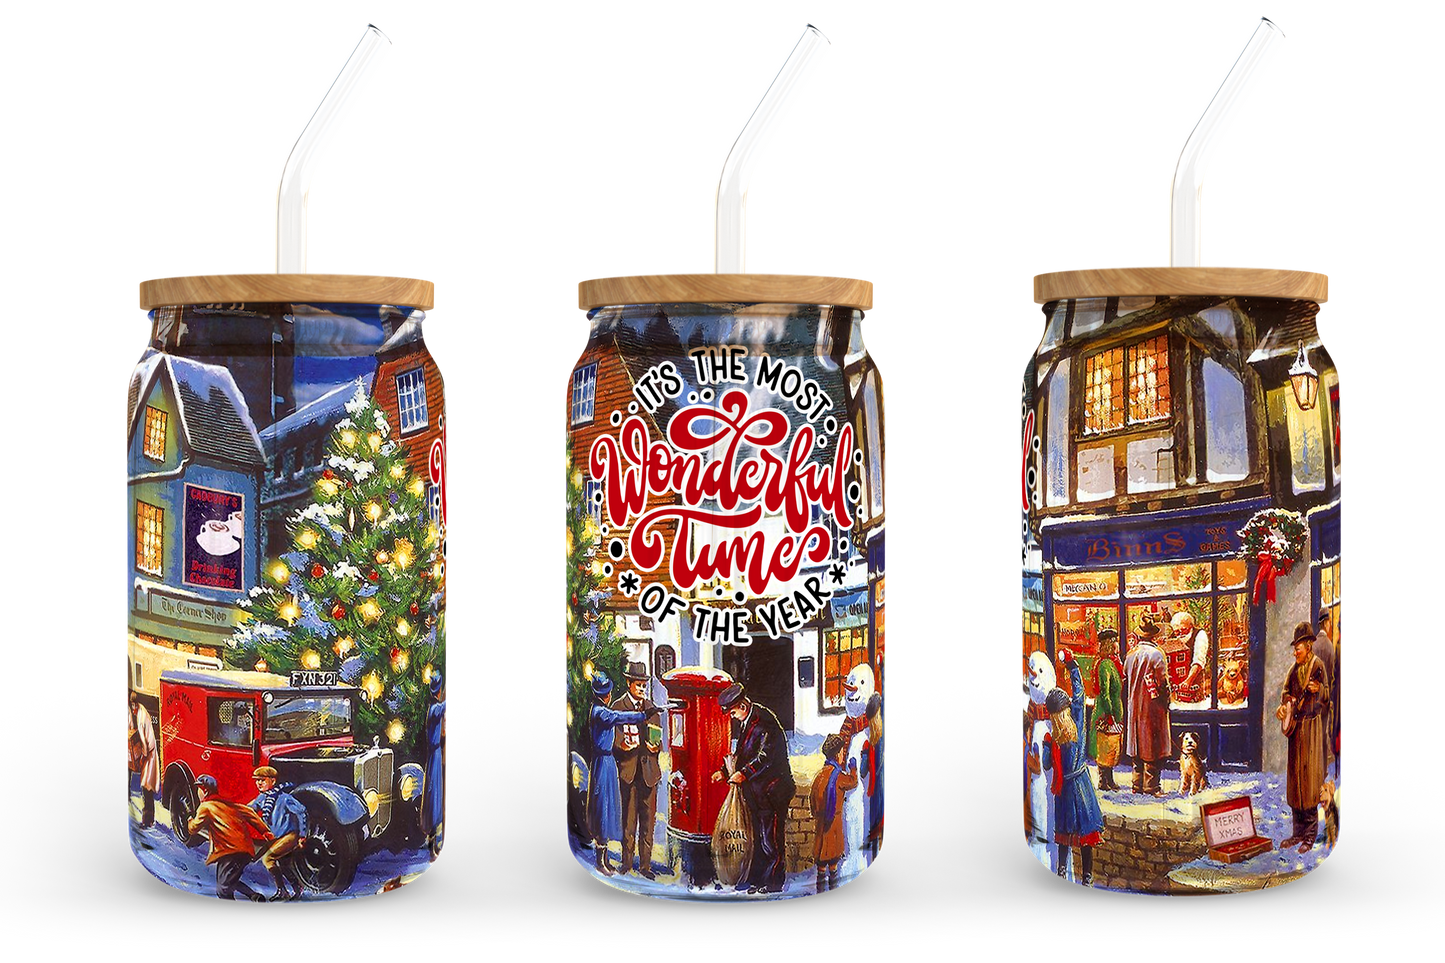 It's the most wonderful time of the year, 16oz Libbey Glass Can Wrap Sublimation Design, Frosted Glass Can Wrap, Christmas PNG Download